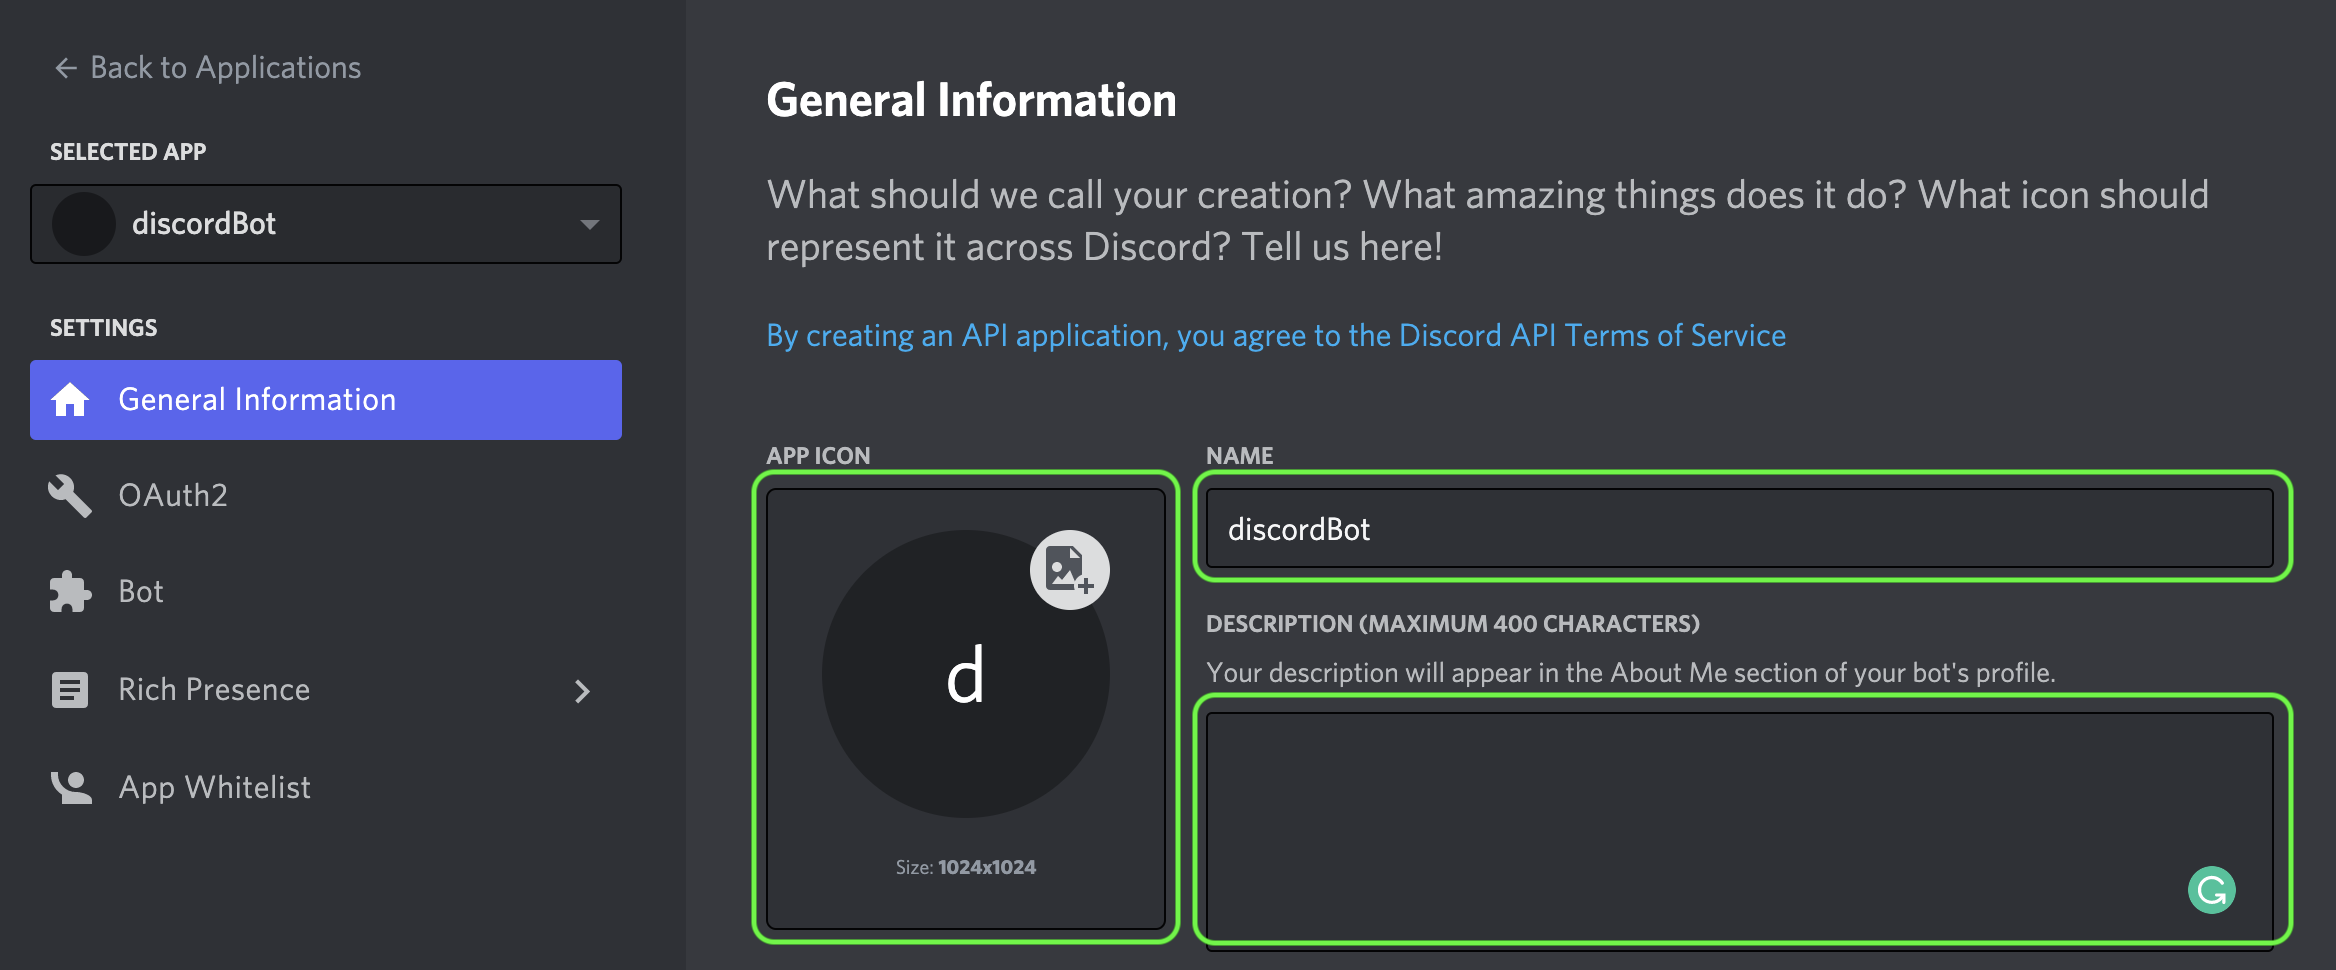 Application’s general information page with a customizable icon image and an About Me section